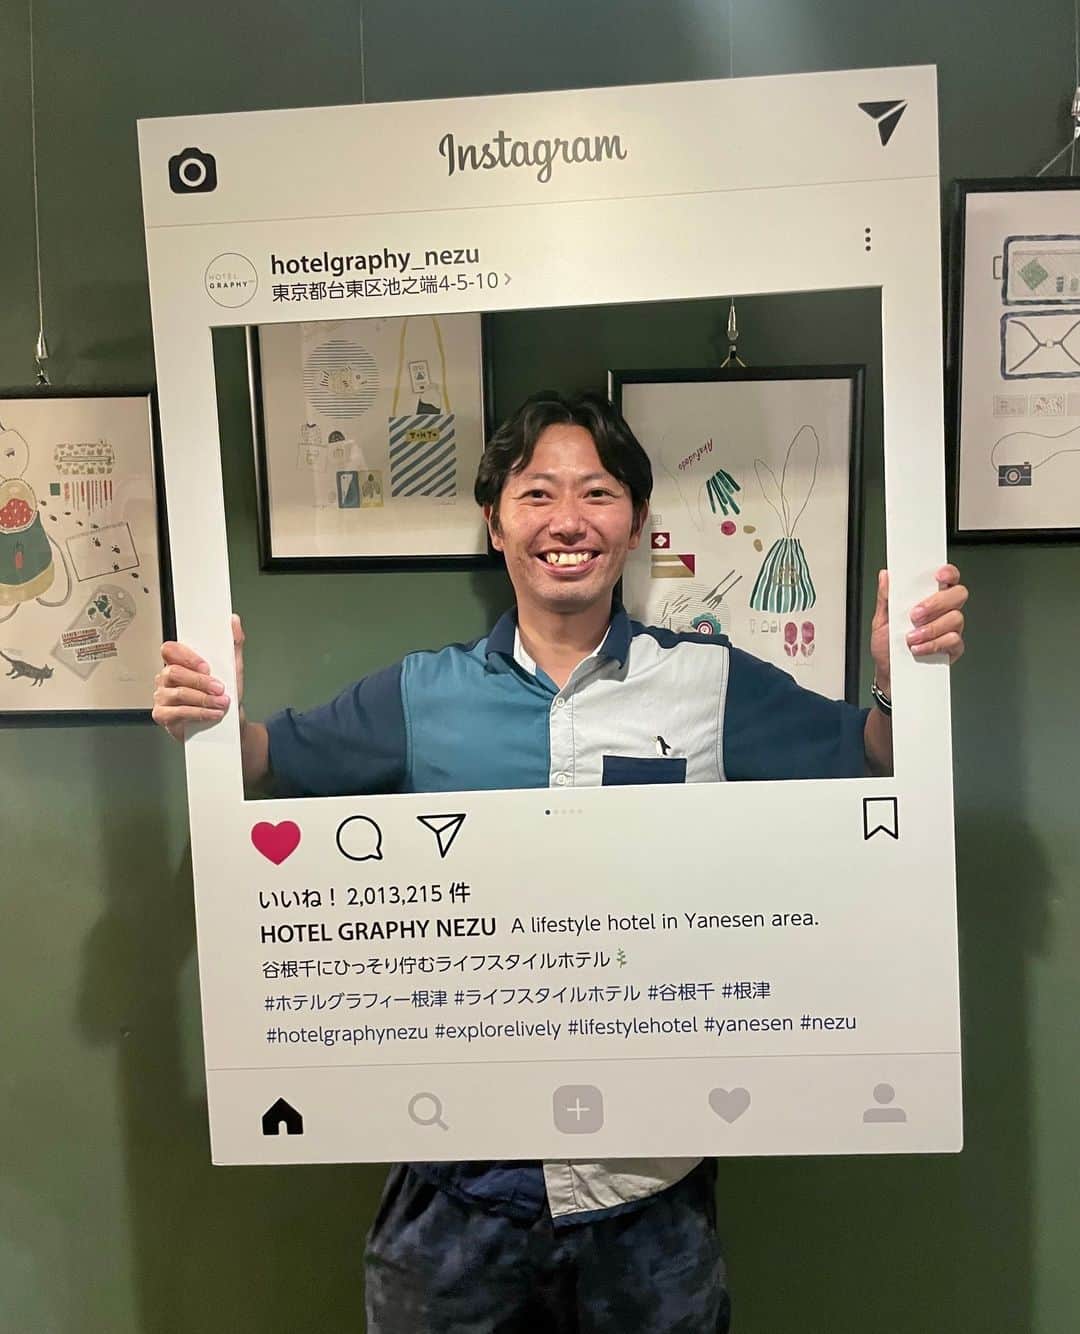 hotelgraphynezuさんのインスタグラム写真 - (hotelgraphynezuInstagram)「English below ⇩⁠ ⁠ ホテルグラフィーには、旅仲間や恋人、家族と忘れられないフォトジェニックな思い出を作れるスポットがたくさんあります。 ⁠ ⁠ ホテルグラフィー根津での一番の思い出や思い出スポット・出逢いは何ですか?⁠ ⁠ この投稿にコメントして教えてください。 🚩👇⁠ ⁠ ---------------------⁠ ⁠ Many spots at HOTEL GRAPHY can make unforgettable and photogenic memories to share with your trip buddy, your lover or your family. ⁠ ⁠ What is your best memory or memorable spot/ encounter at HOTEL GRAPHY NEZU?⁠ ⁠ Tell us by commenting this post ! 🚩👇⁠ ⁠ ⁠ ⁠ ⁠ ⁠ ⁠ ⁠ .⁠ .⁠ .⁠ #explorelively #lifestylehotel #hotelgraphynezu⁠ ⁠ ⁠ #hotel #hostel  #tokyohotel #tokyohostel ⁠ #uenohotel #travelmemories #hotellounge #tatamispace #hotellobby #pictures #instagramframe #hotelfacility ⁠ #triptojapan⁠ ⁠ ⁠ #ホテルグラフィー根津 #東京ホテル #東京ホステル #思い出　#ライフスタイルホテ #根津 #インスタフレーム #デザイナーホテル #東京ホステル #ホテルで過ごしたら #畳スペース #ホテルロビー #写真が好き #旅行の思い出」9月9日 20時45分 - hotelgraphy_nezu